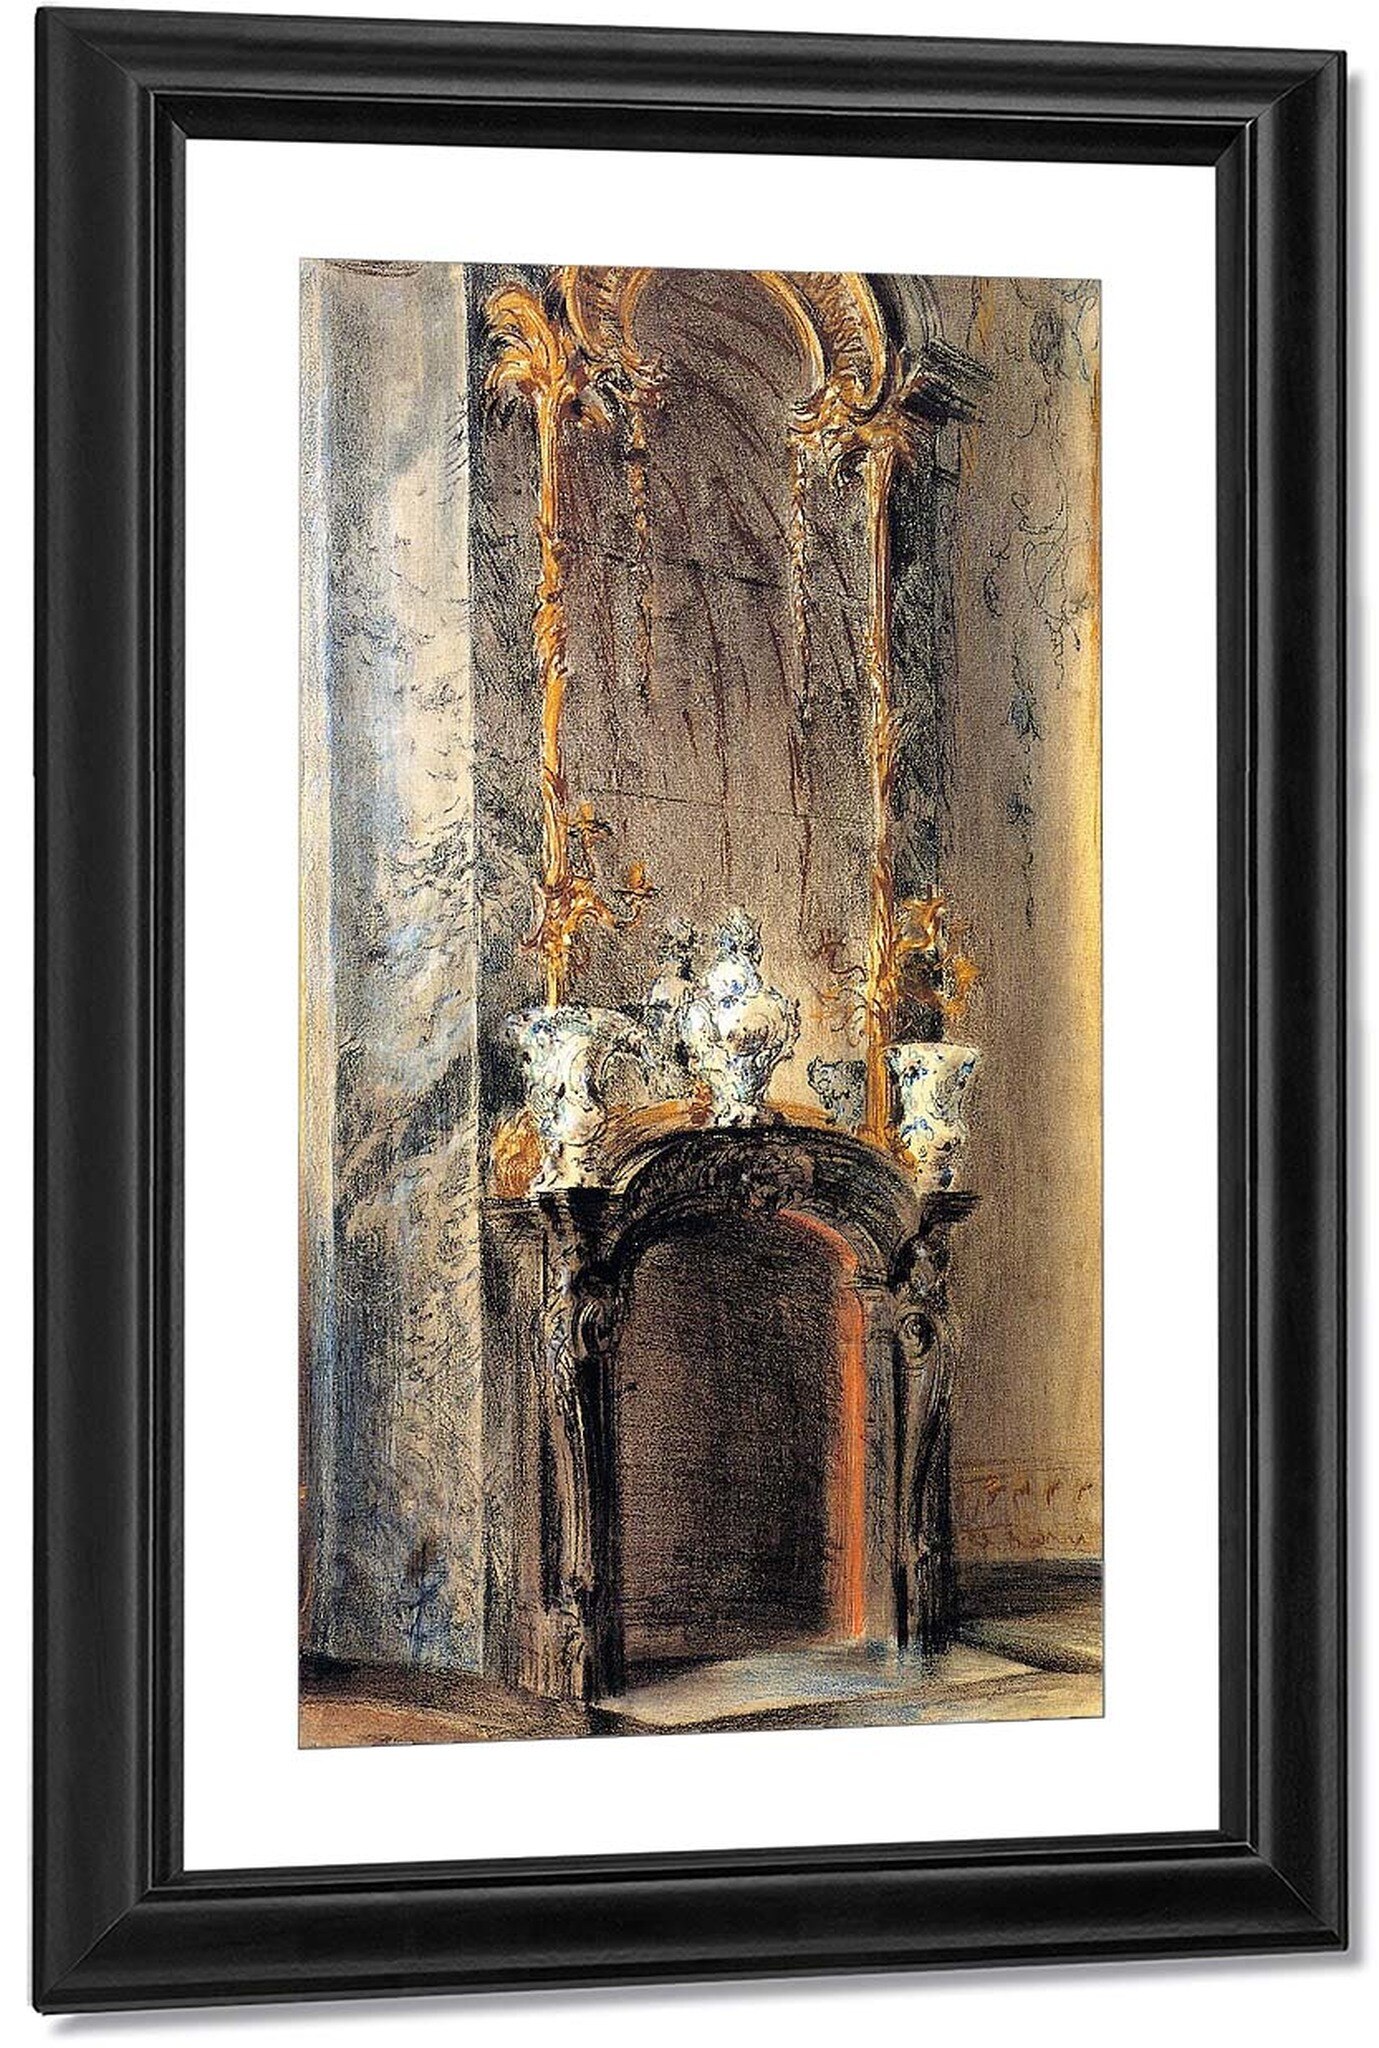 Renaissance Fireplace Awesome Rococo Fireplace by Adolph Von Menzel